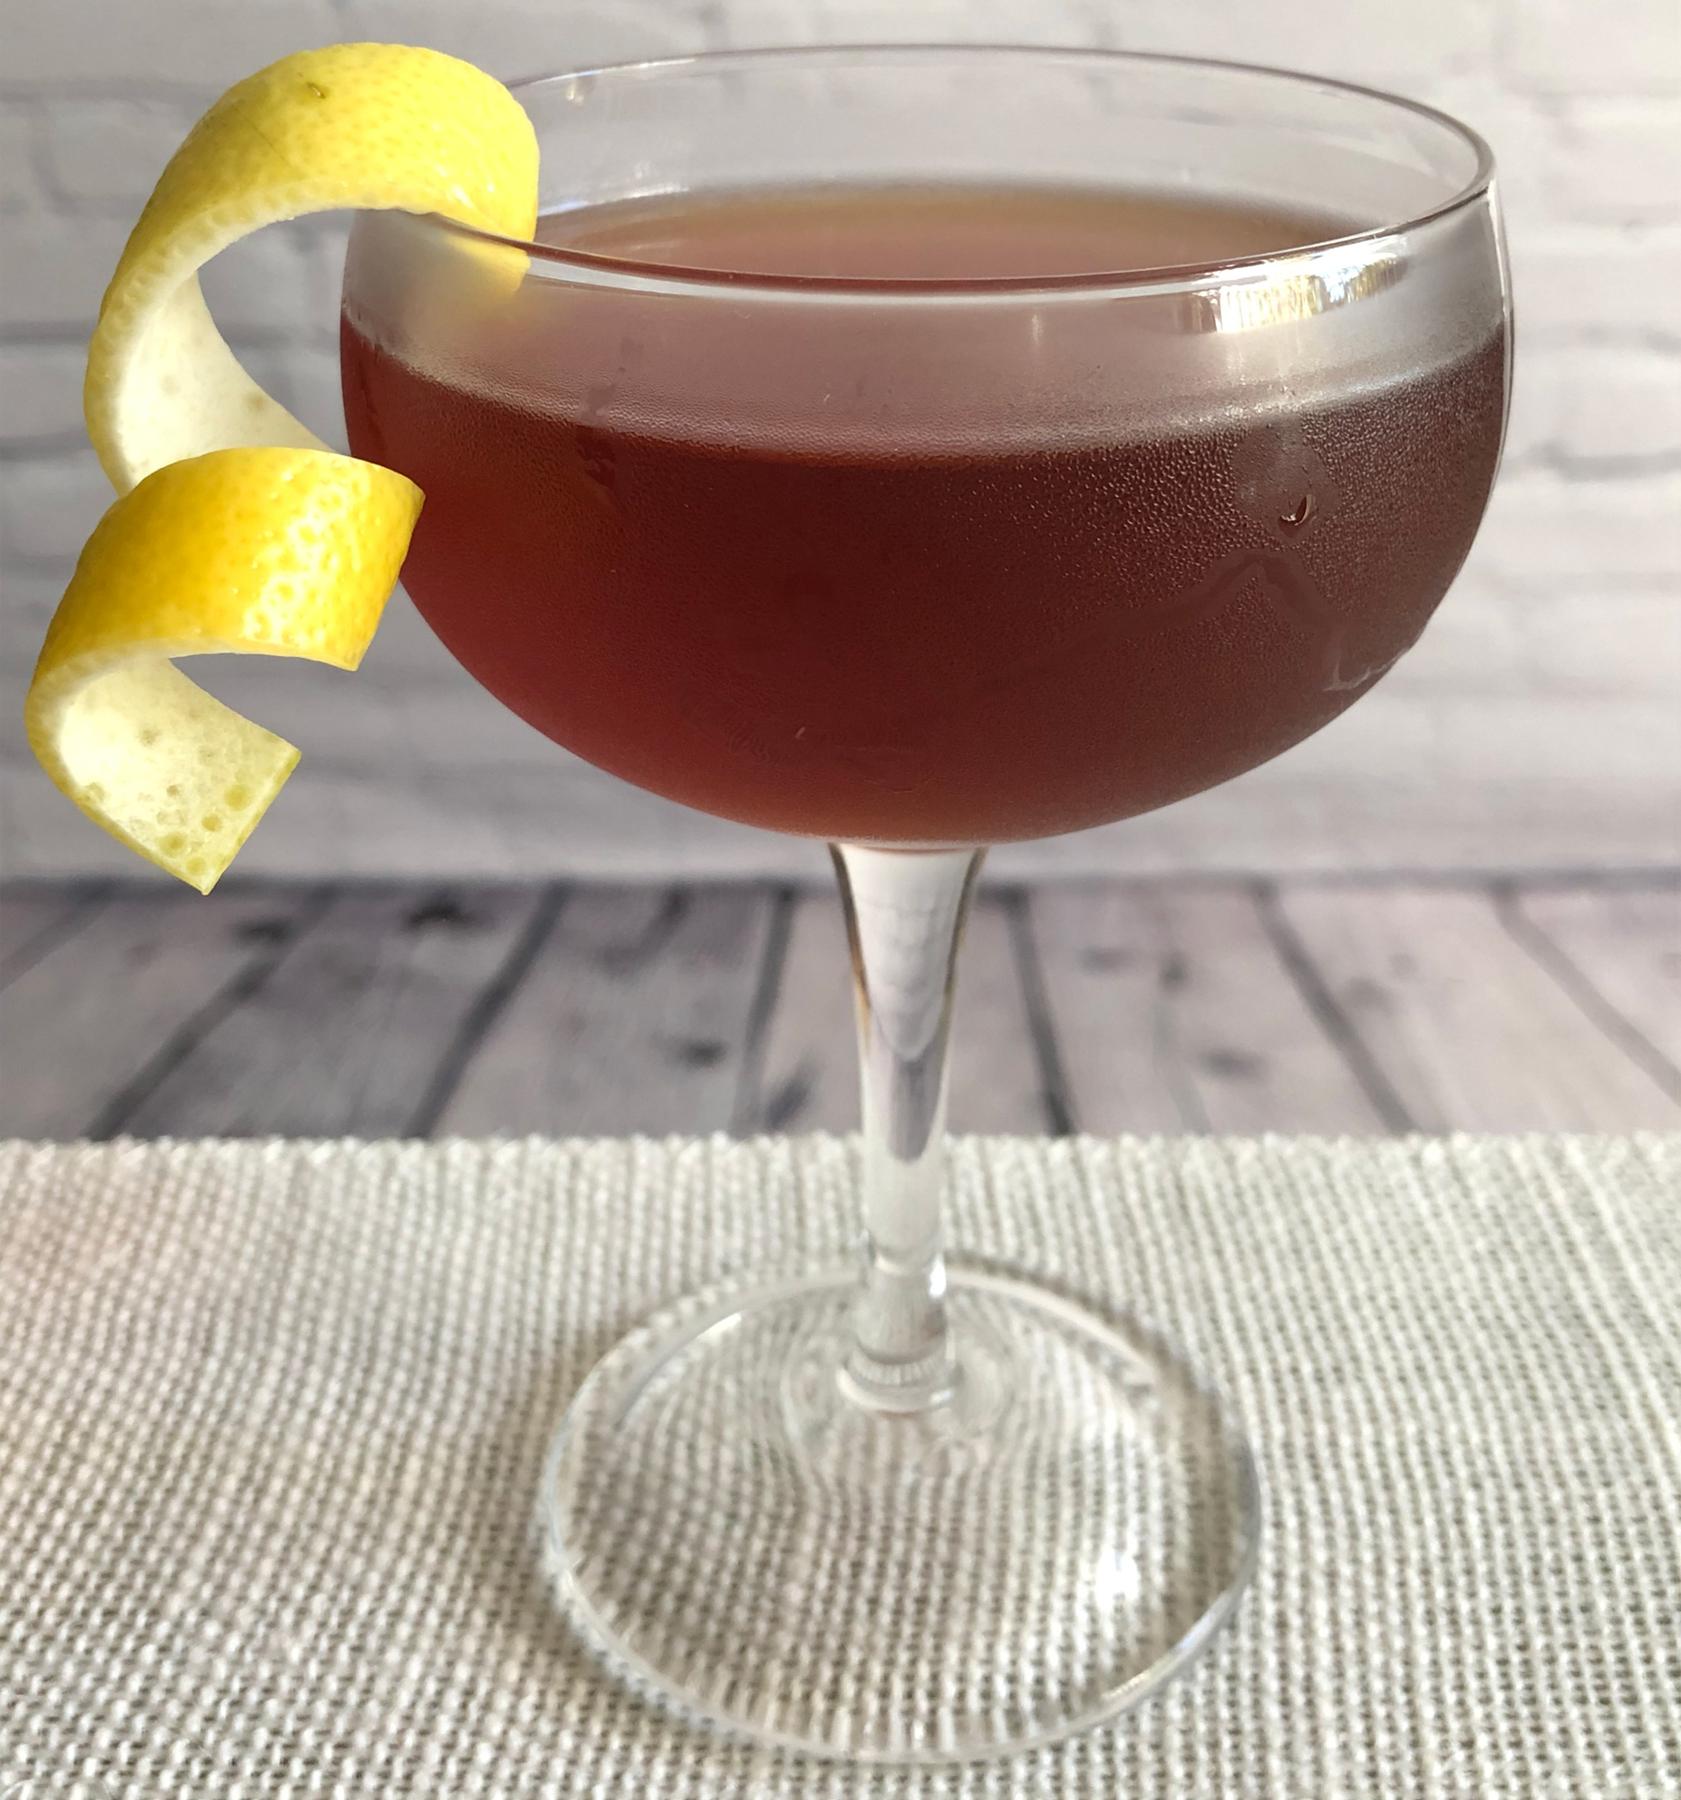 An example of the Transatlantic Giant, the mixed drink (drink), by Colin Shearn, Franklin Mortgage & Investment Company, Philadelphia, featuring bourbon whiskey, Smith & Cross Traditional Jamaica Rum, Cynar, Hayman’s Sloe Gin, crème de cacao (white), Angostura bitters, and lemon twist; photo by Lee Edwards